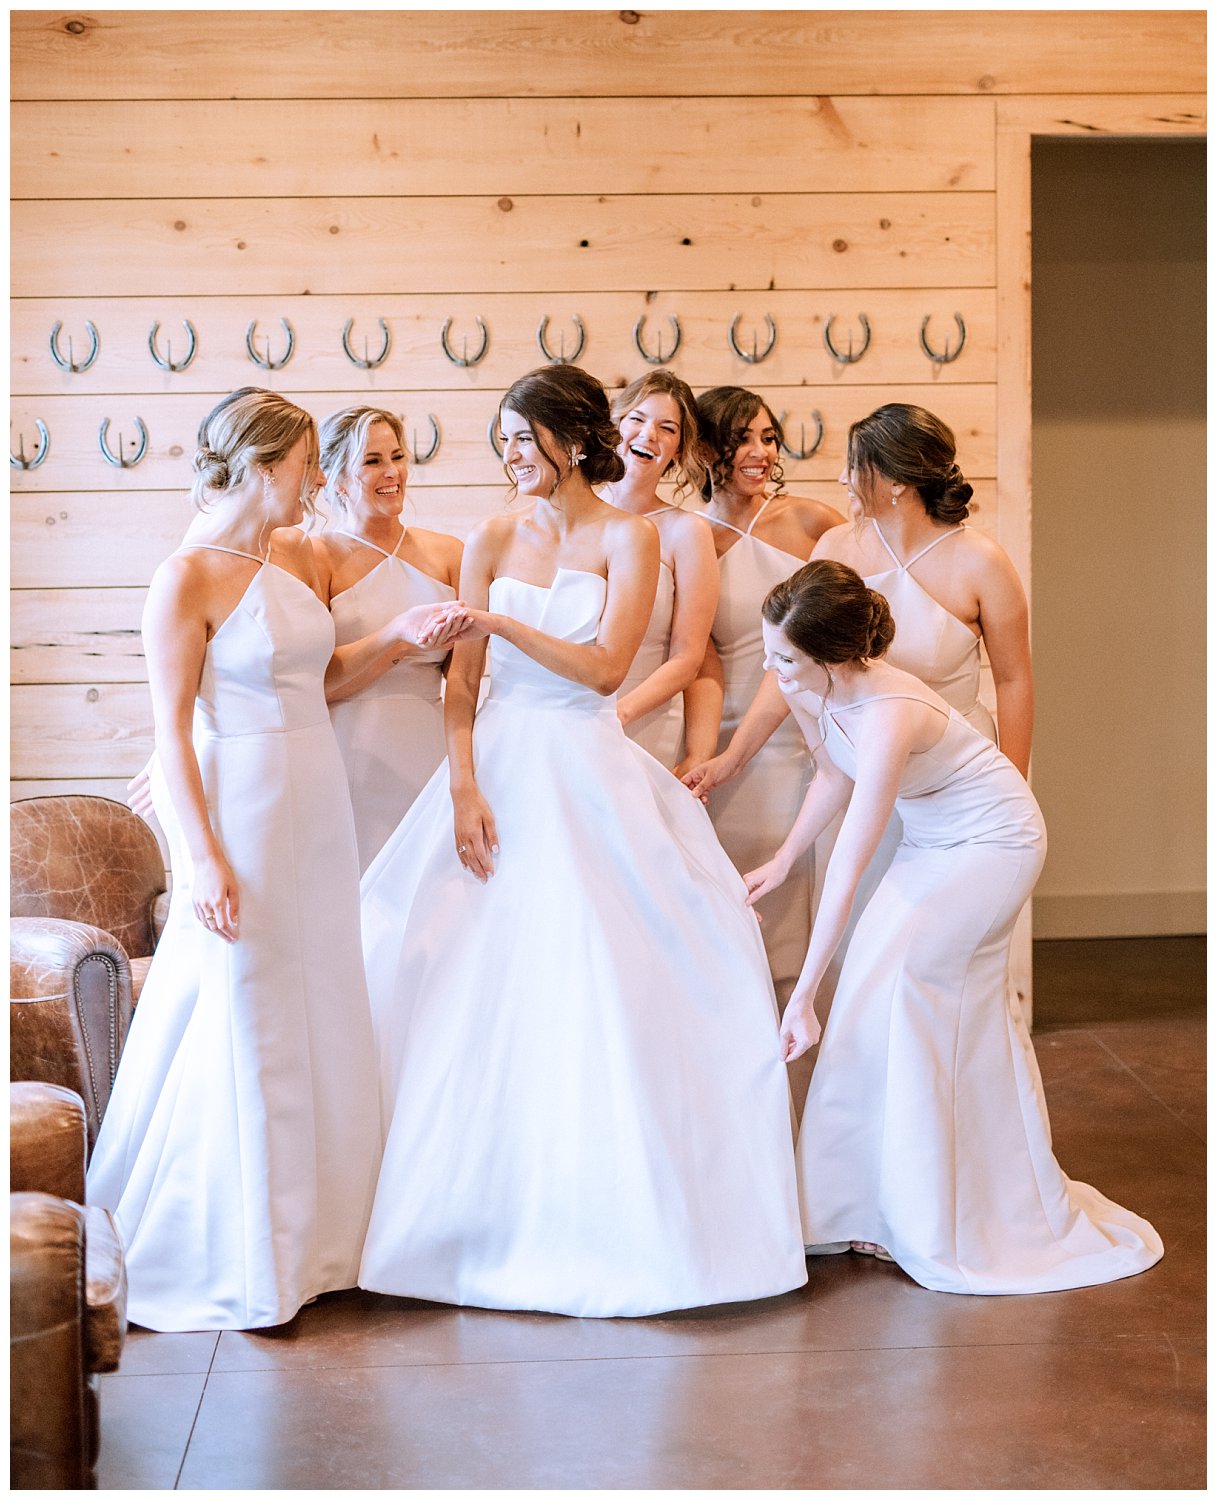 Bride and bridesmaids in getting ready PJS